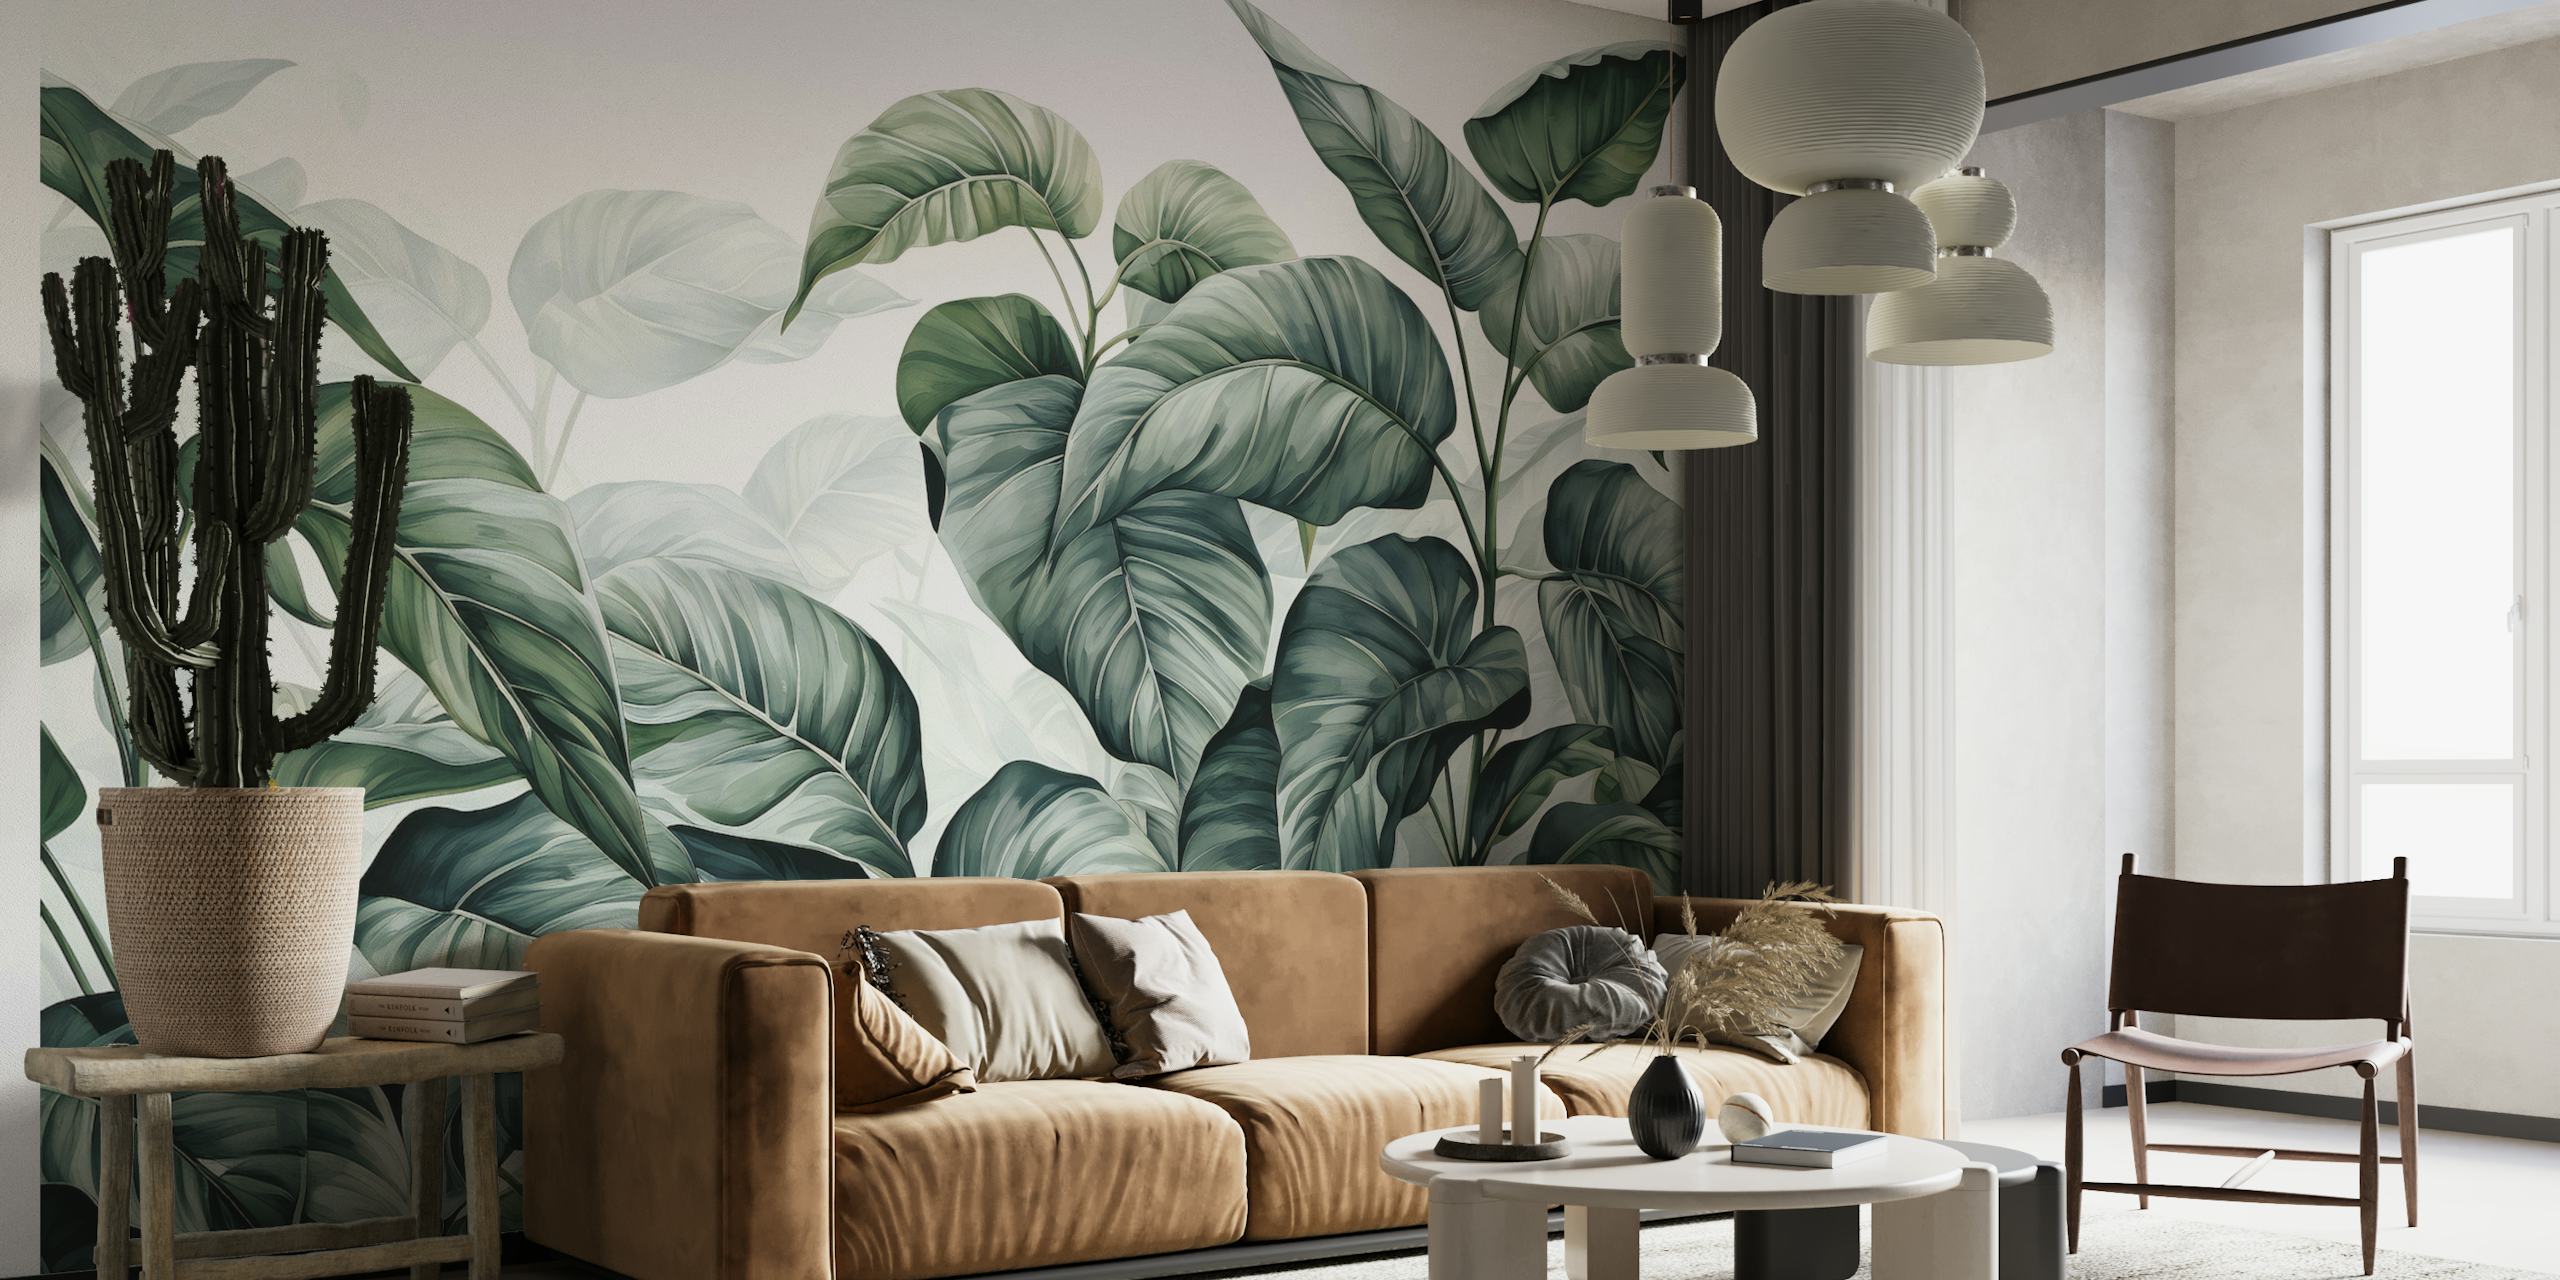 Leafy green botanical wall mural with velvet-textured foliage on a light background